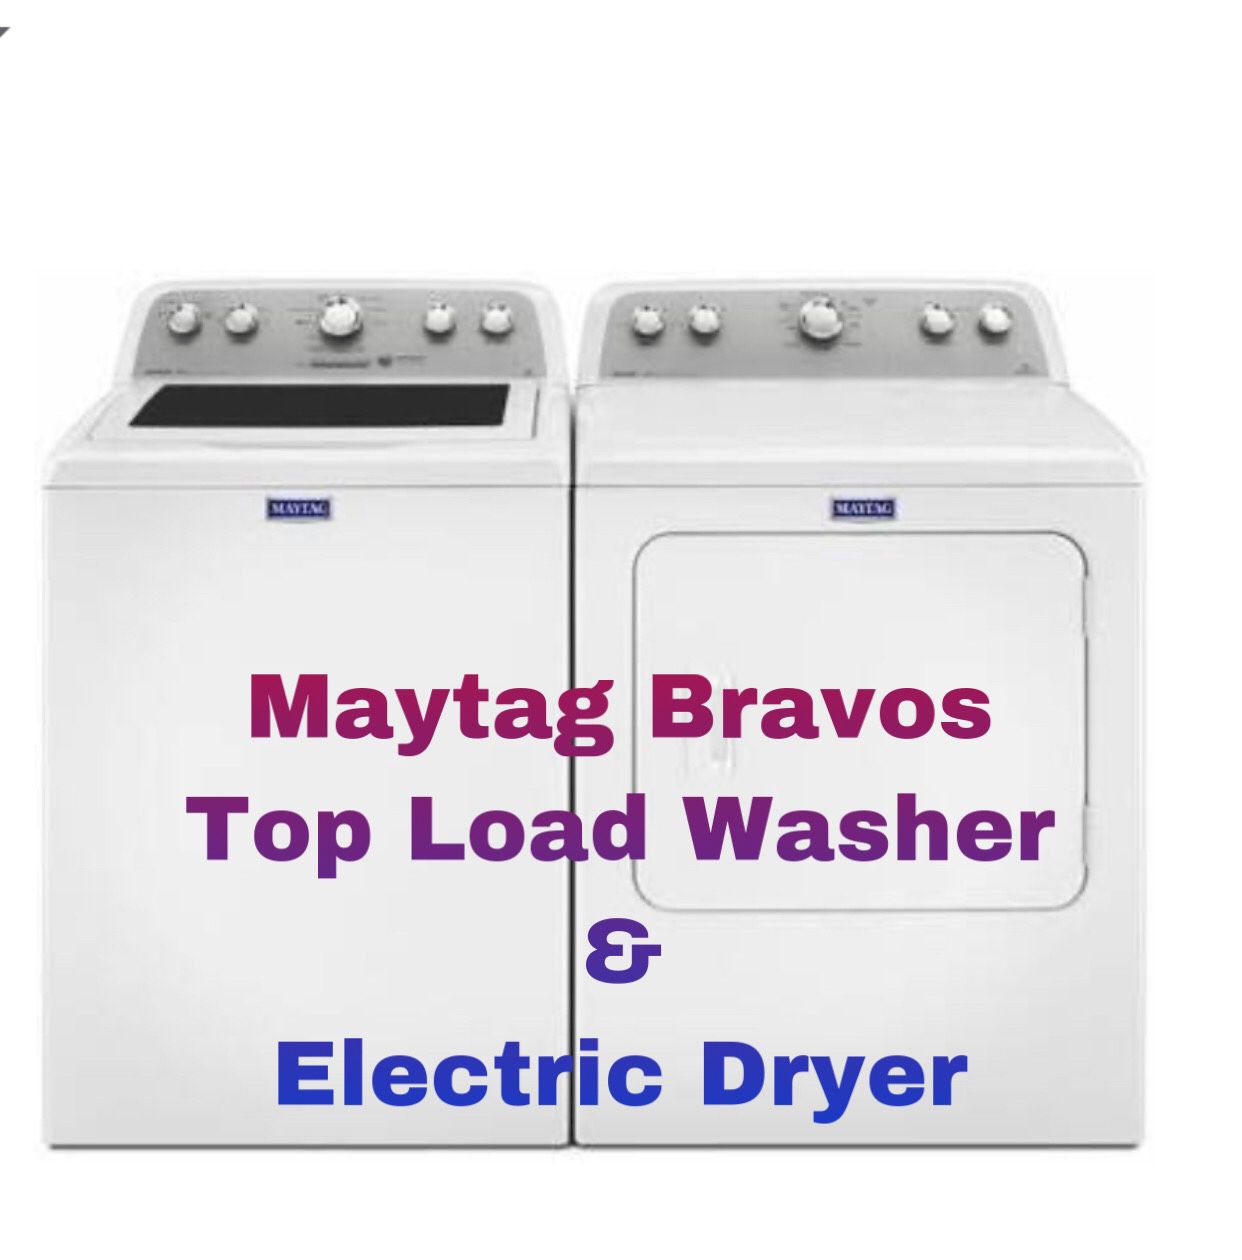 Maytag Bravos Top Load Washer and Electric Dryer